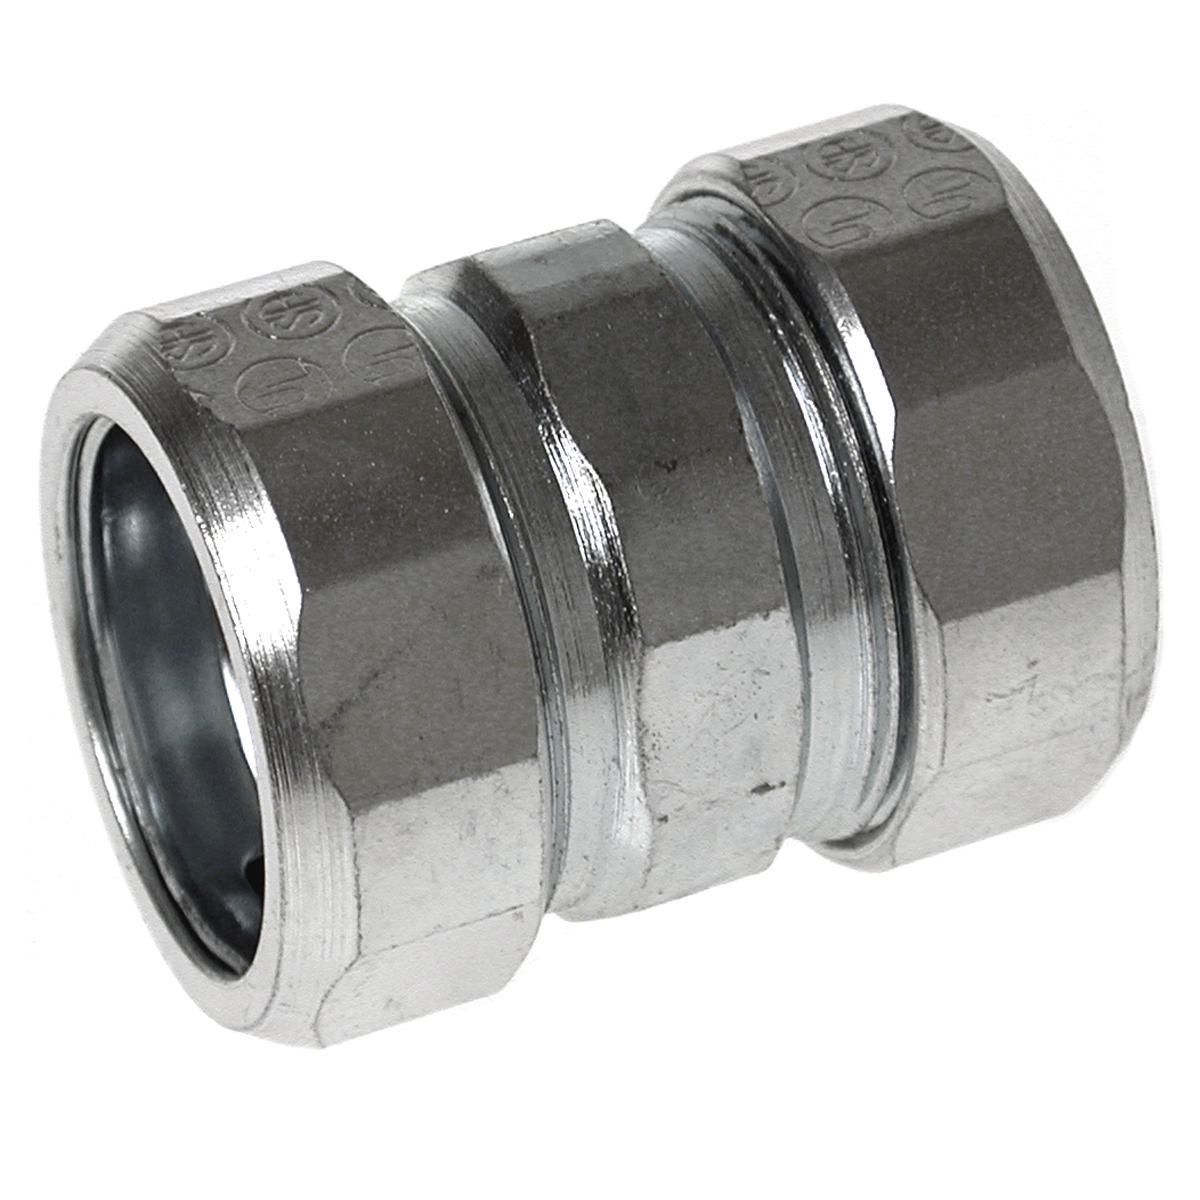 RGD/IMC COMPR COUPLING 1-1/2 IN STEEL